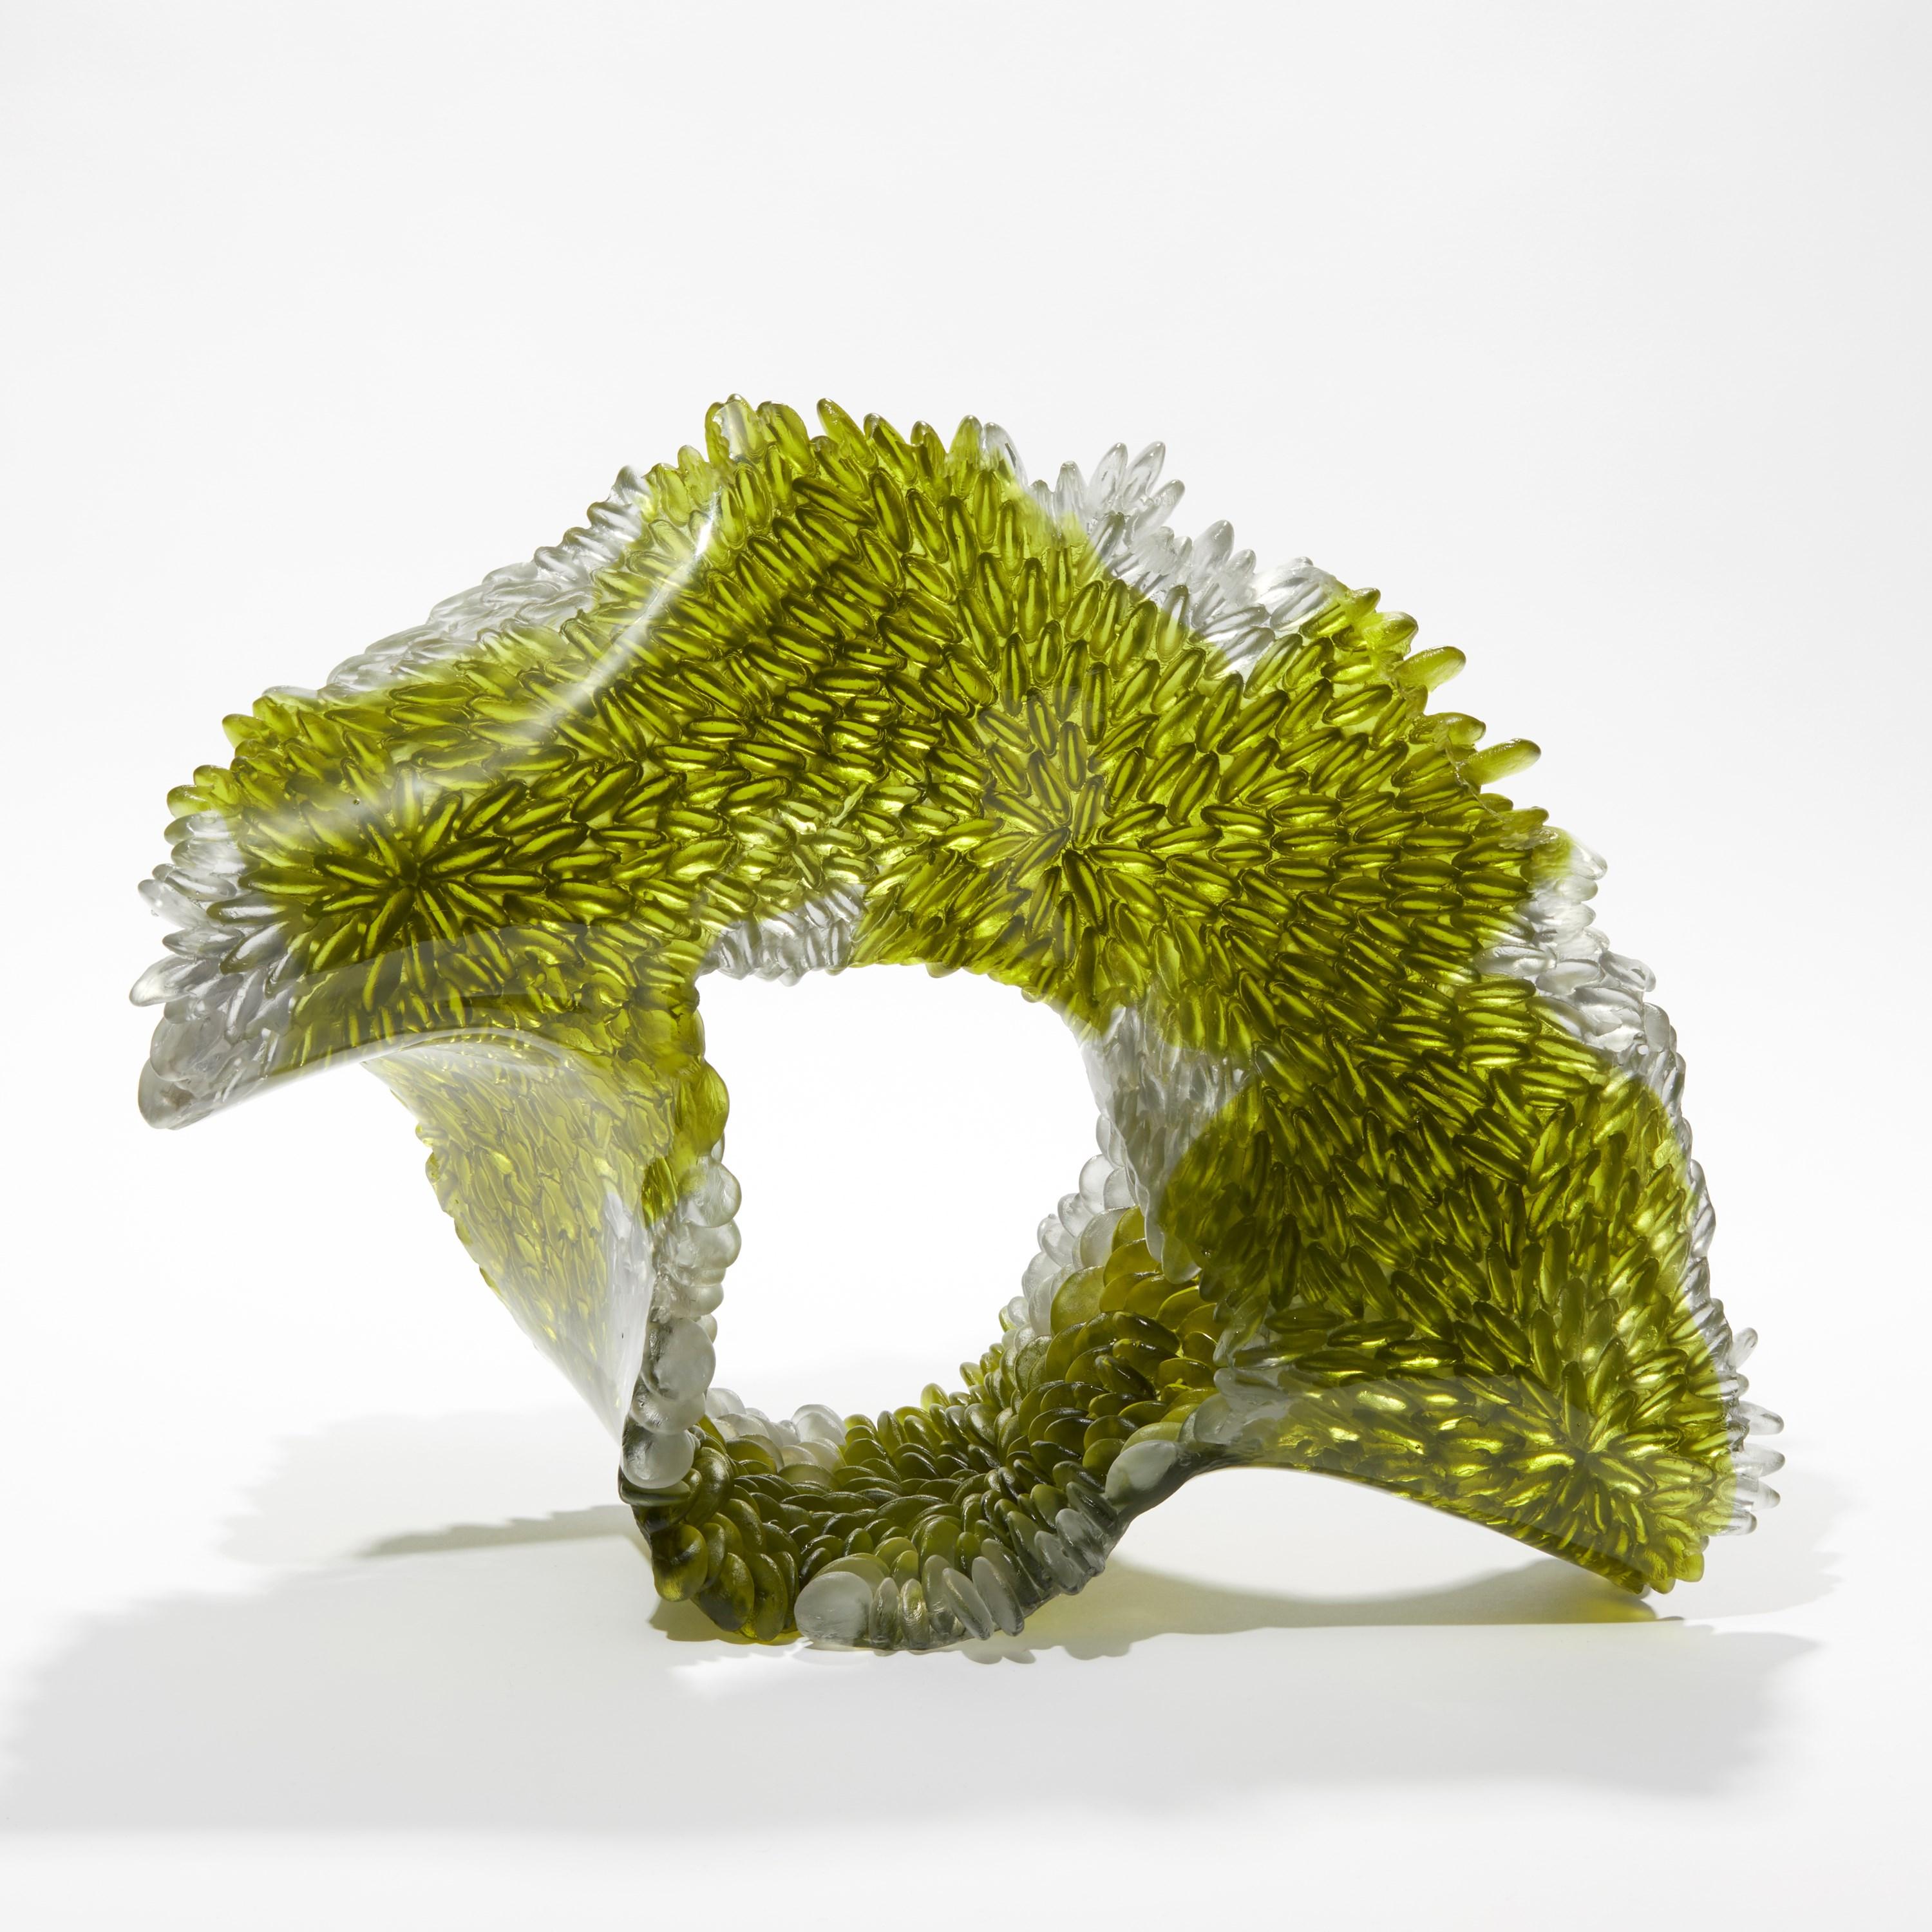 Organic Modern  Foliage I, Olive Green & Grey Cast Glass Sculpture by Nina Casson McGarva For Sale